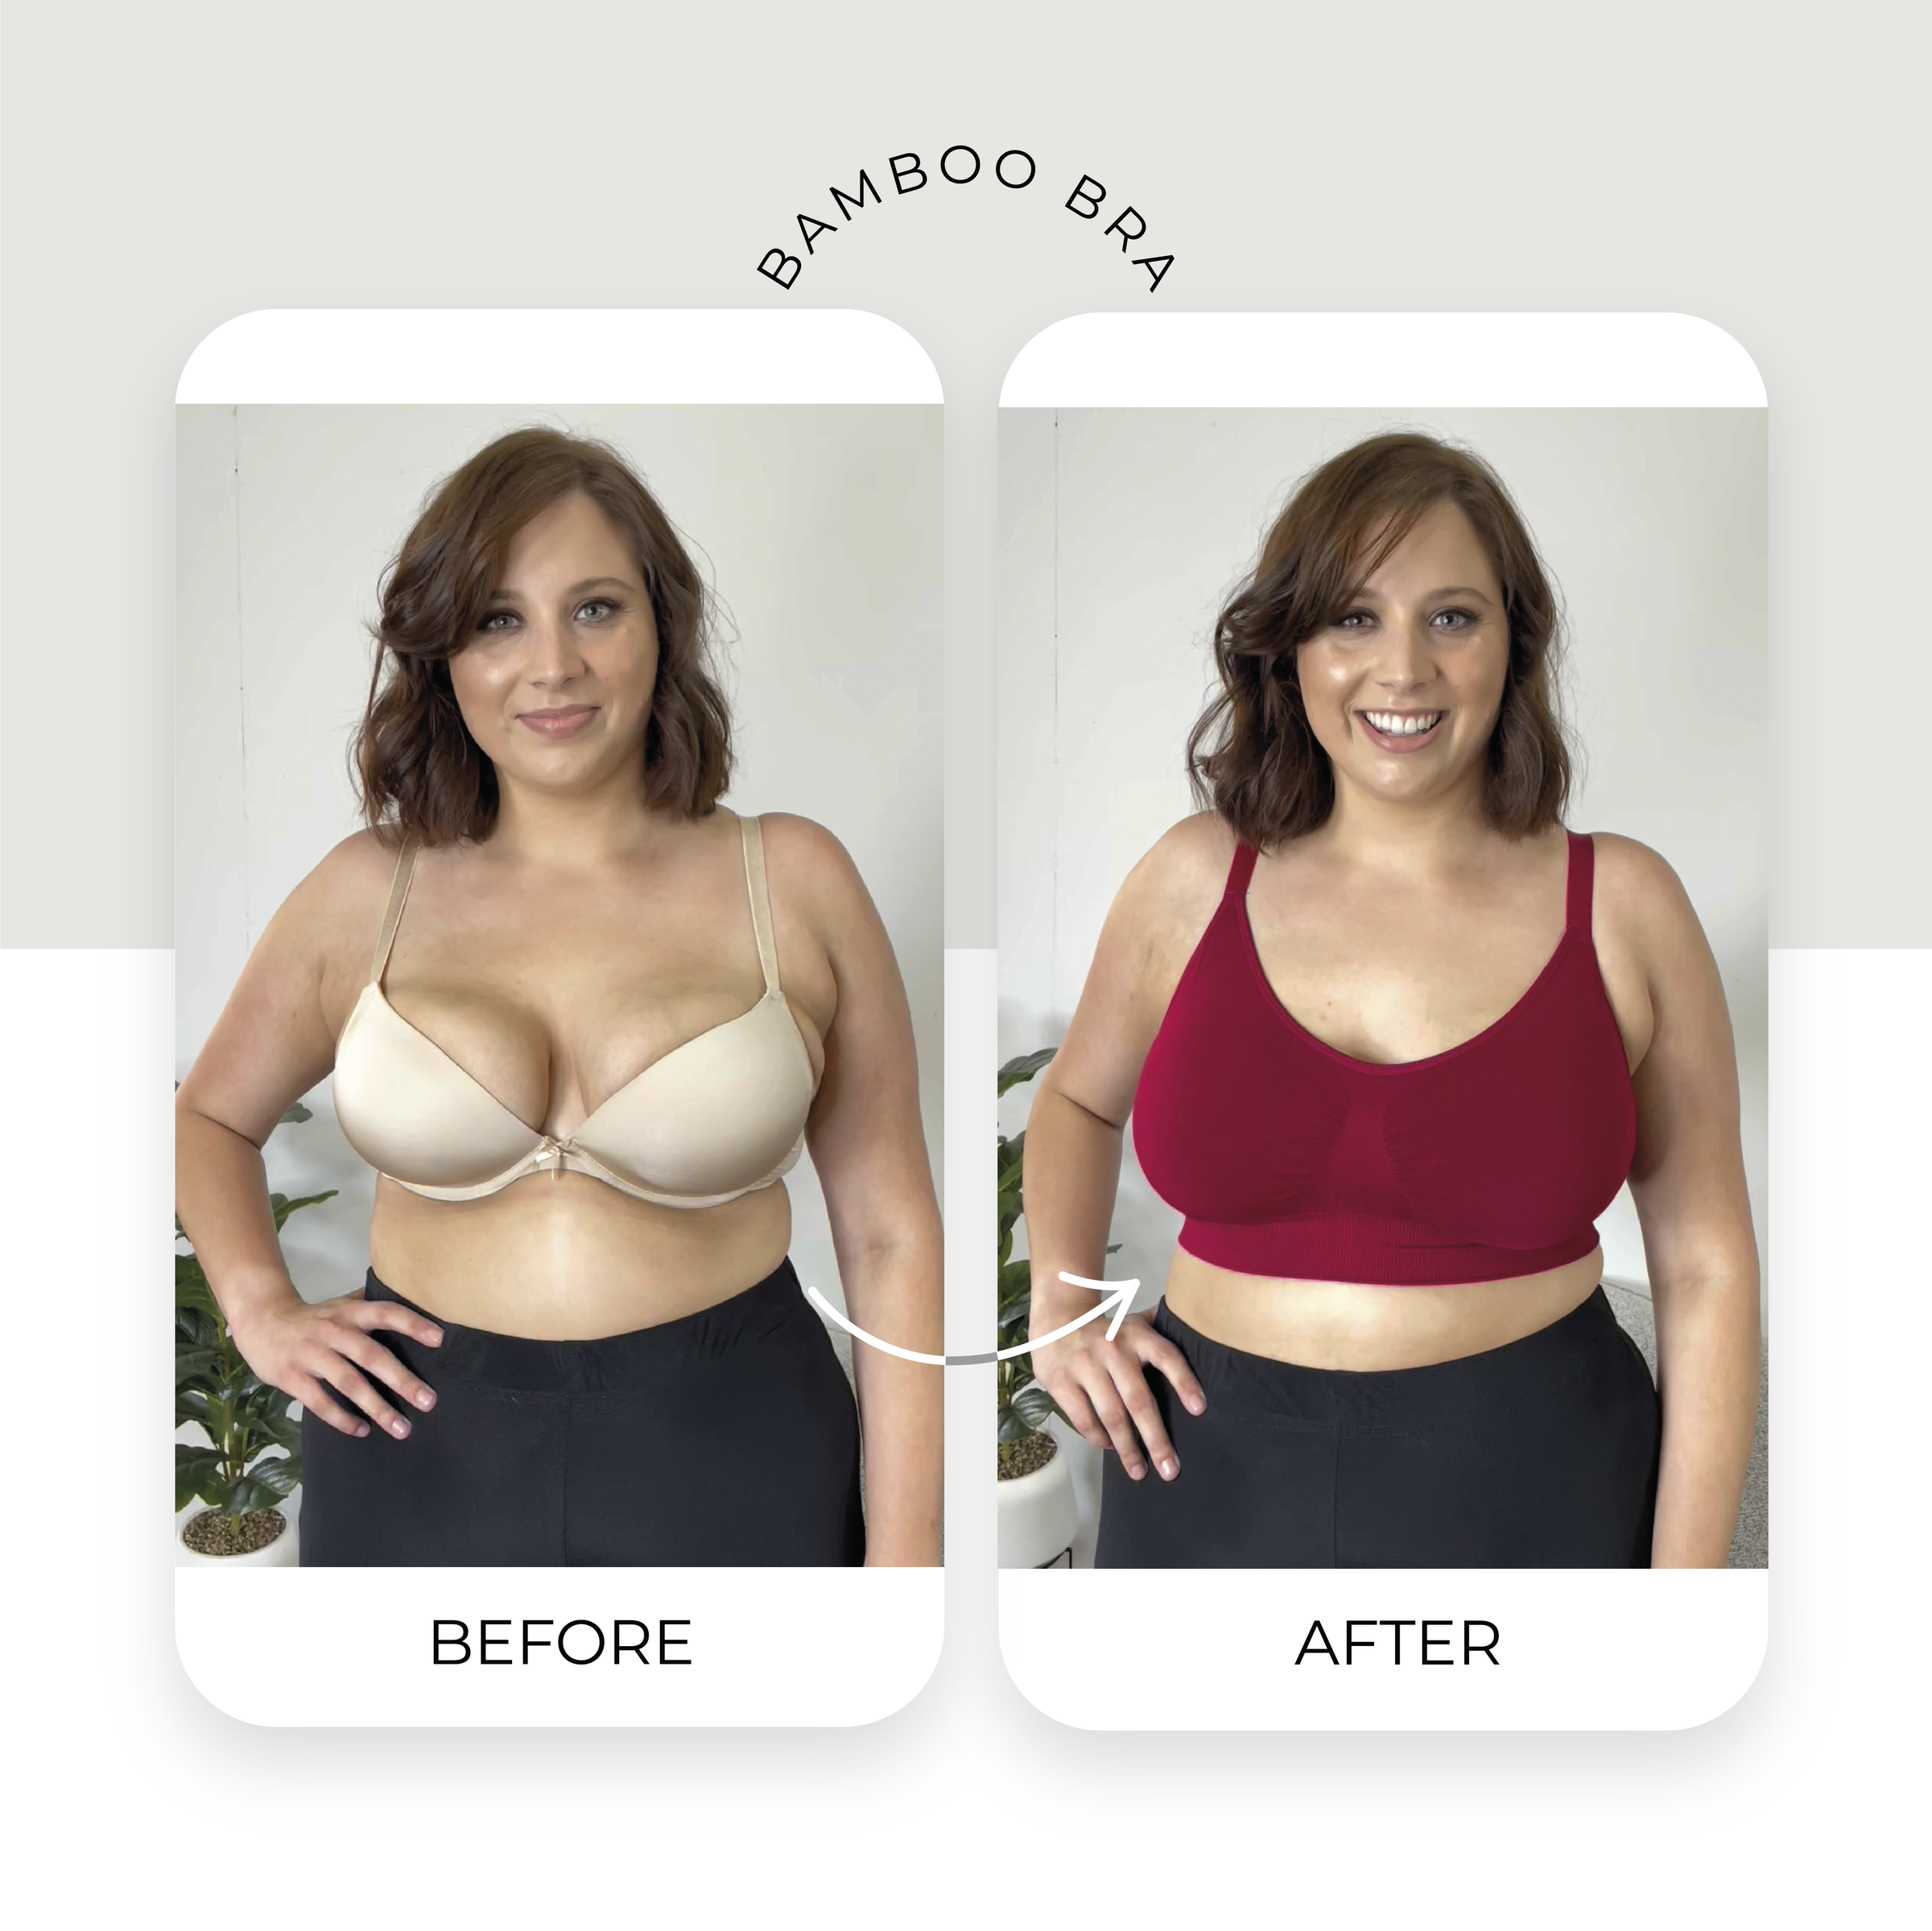 WireFree Bamboo Bra for Big Boobs